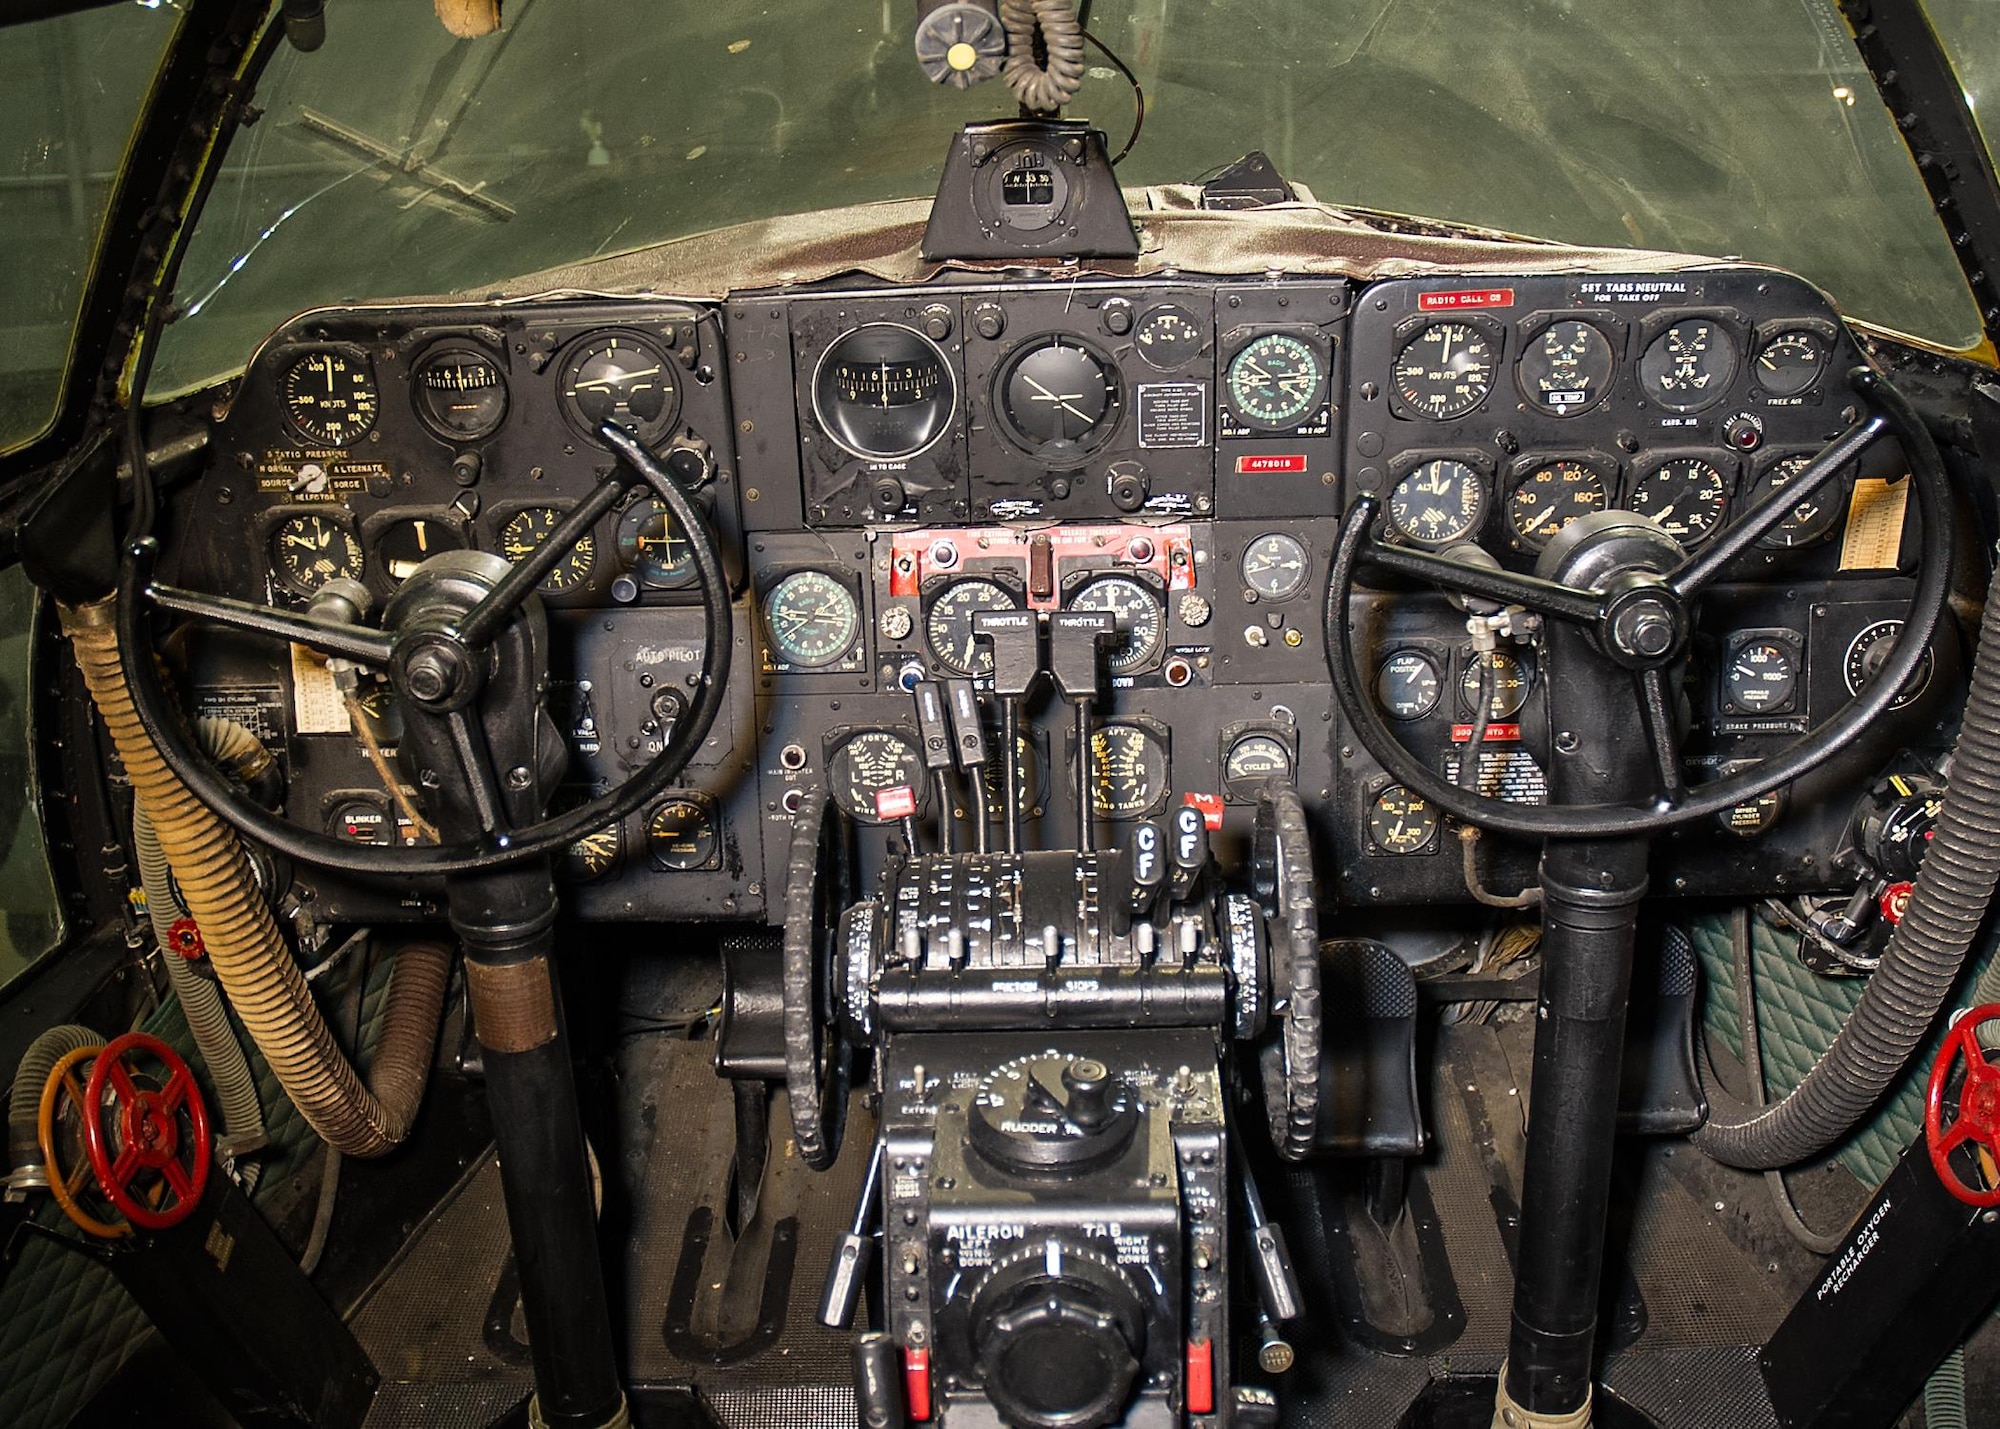 DAYTON, Ohio -- Curtiss C-46D Commando cockpit view in the WWII Gallery at the National Museum of the United States Air Force.(U.S. Air Force photo)